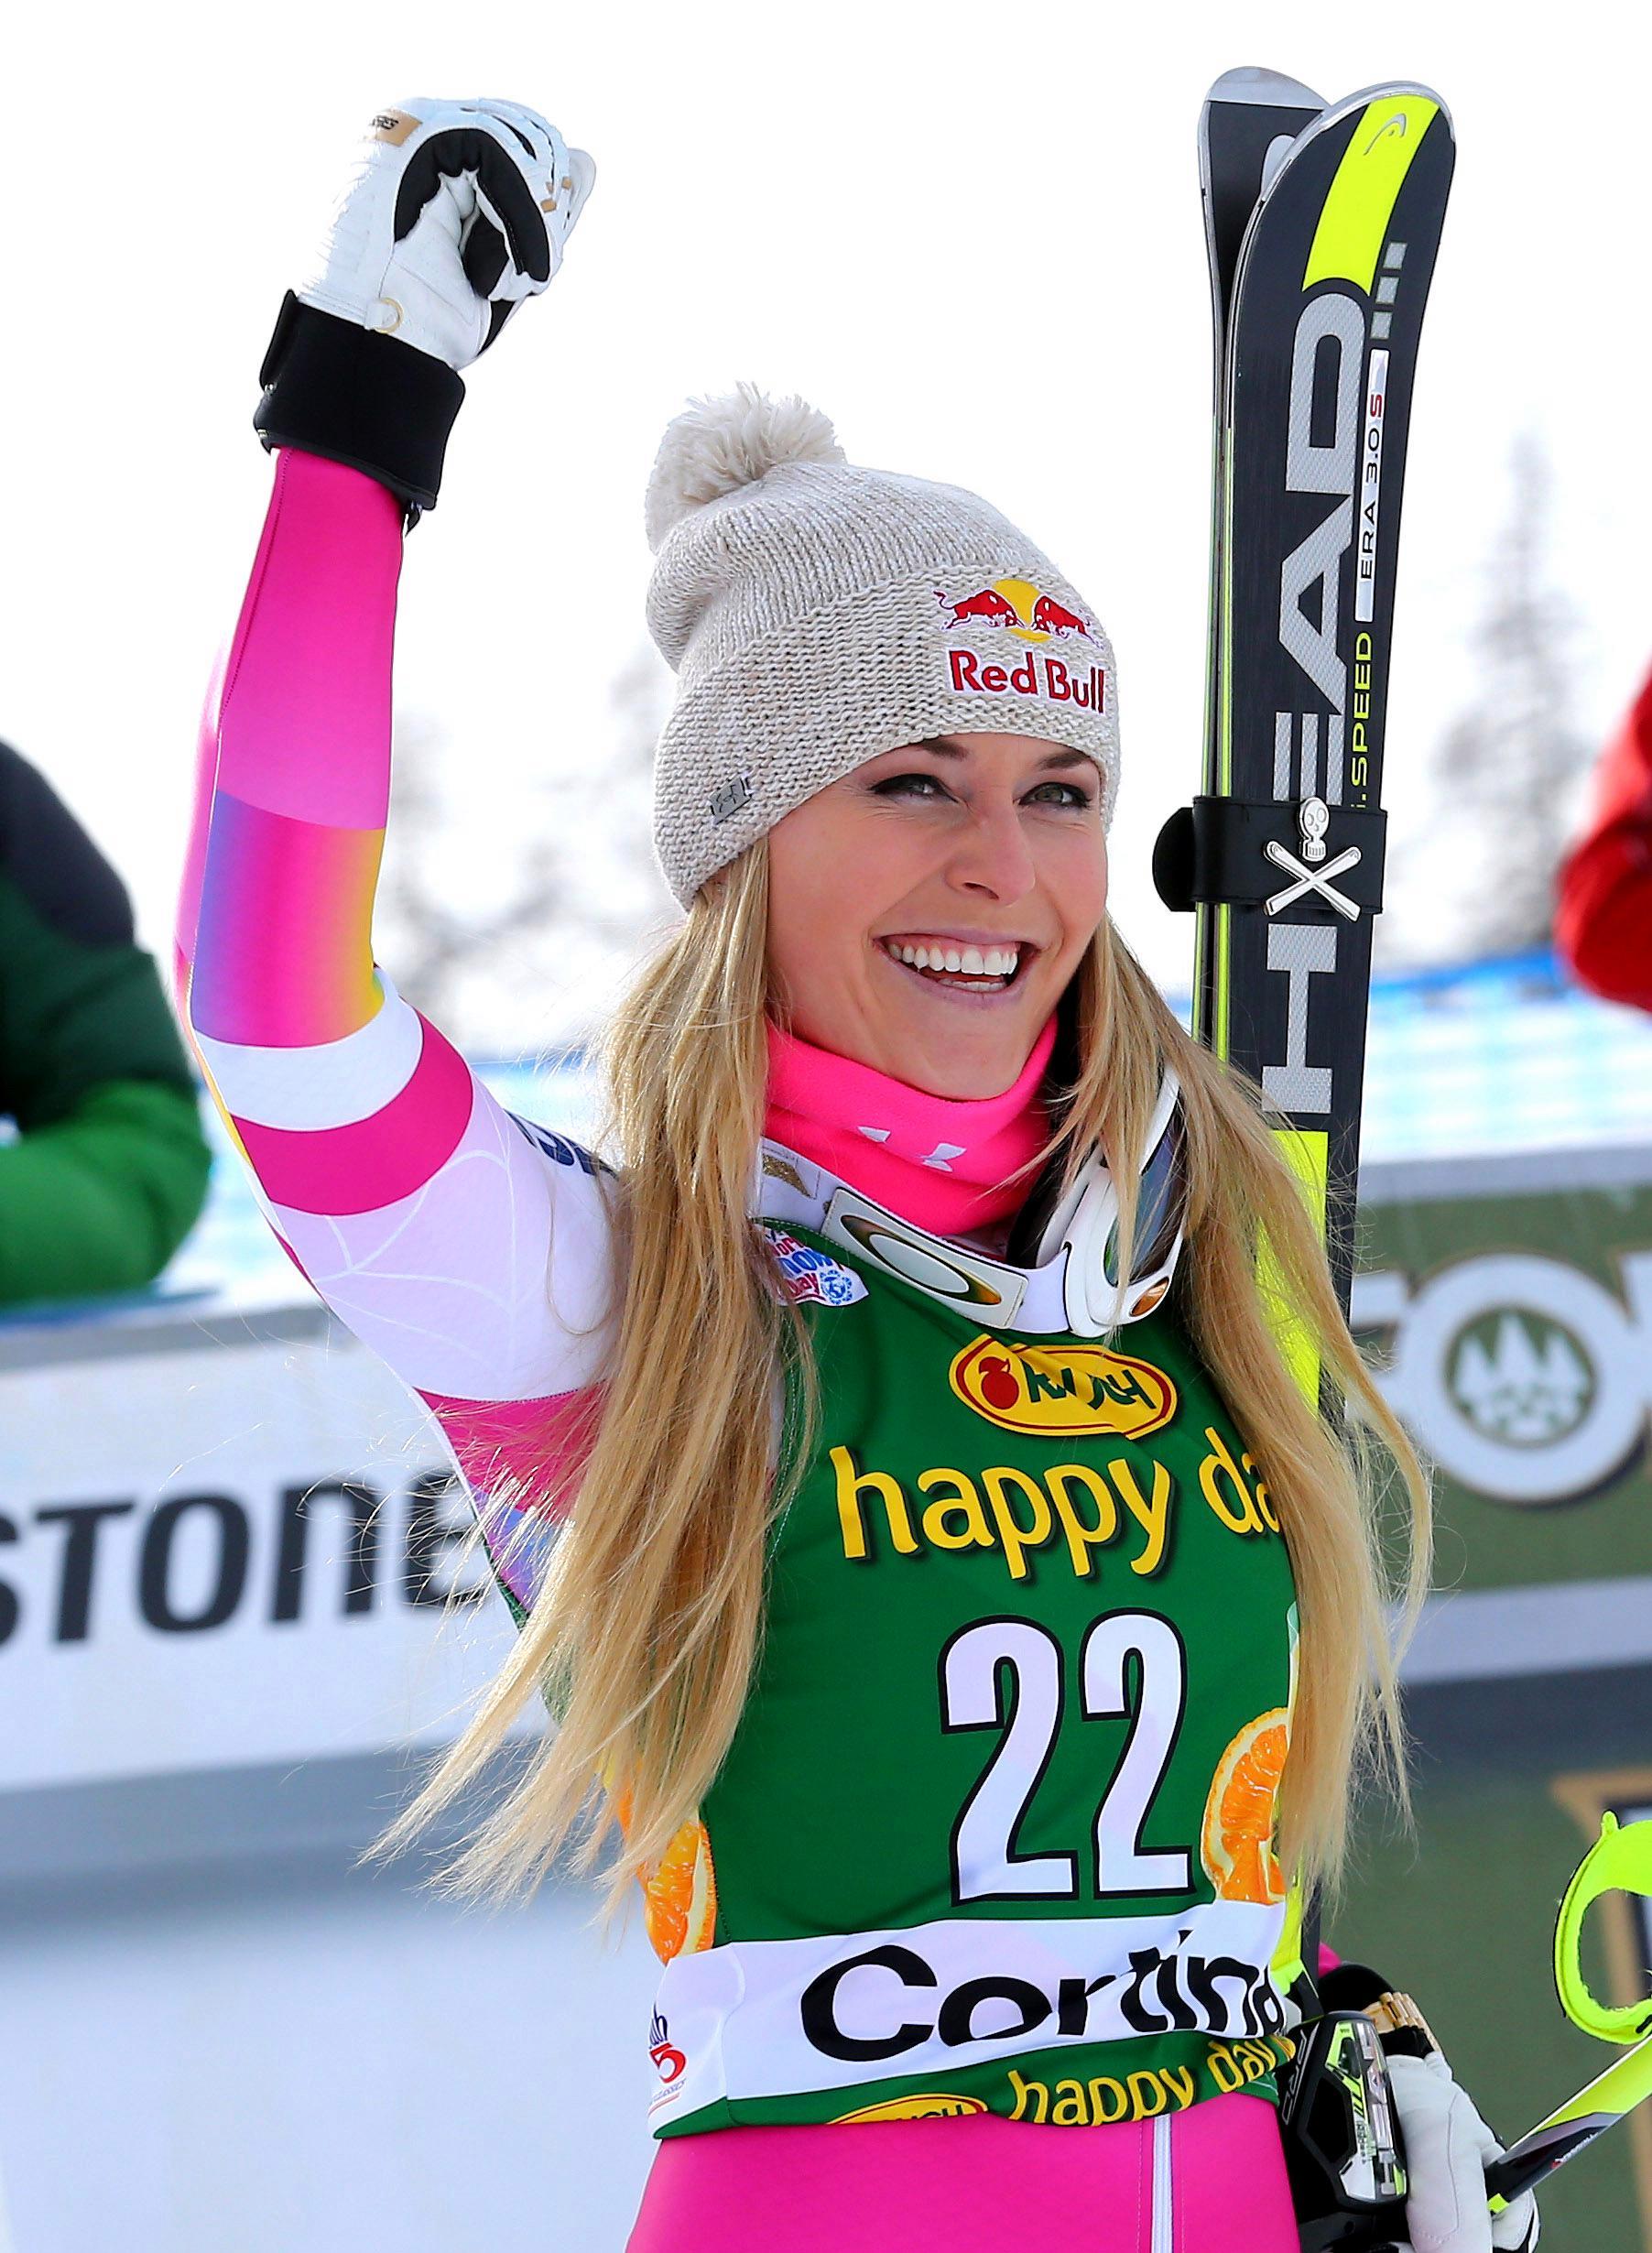 Lindsey Vonn Is An Olympic Skier And Received The Nude Selfie From Woods While They Were